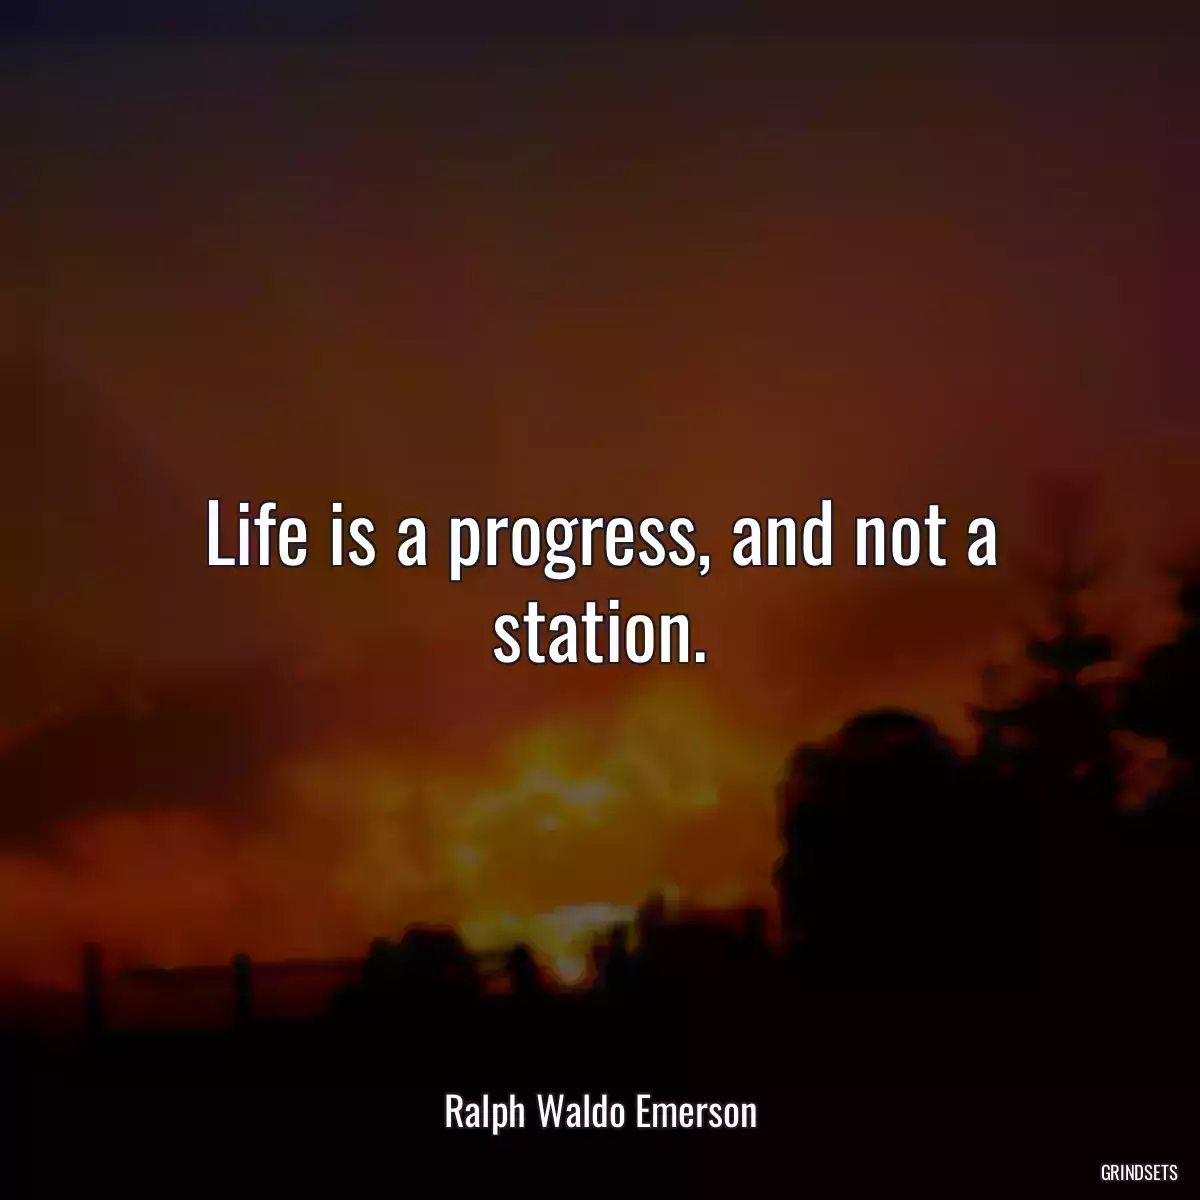 Life is a progress, and not a station.